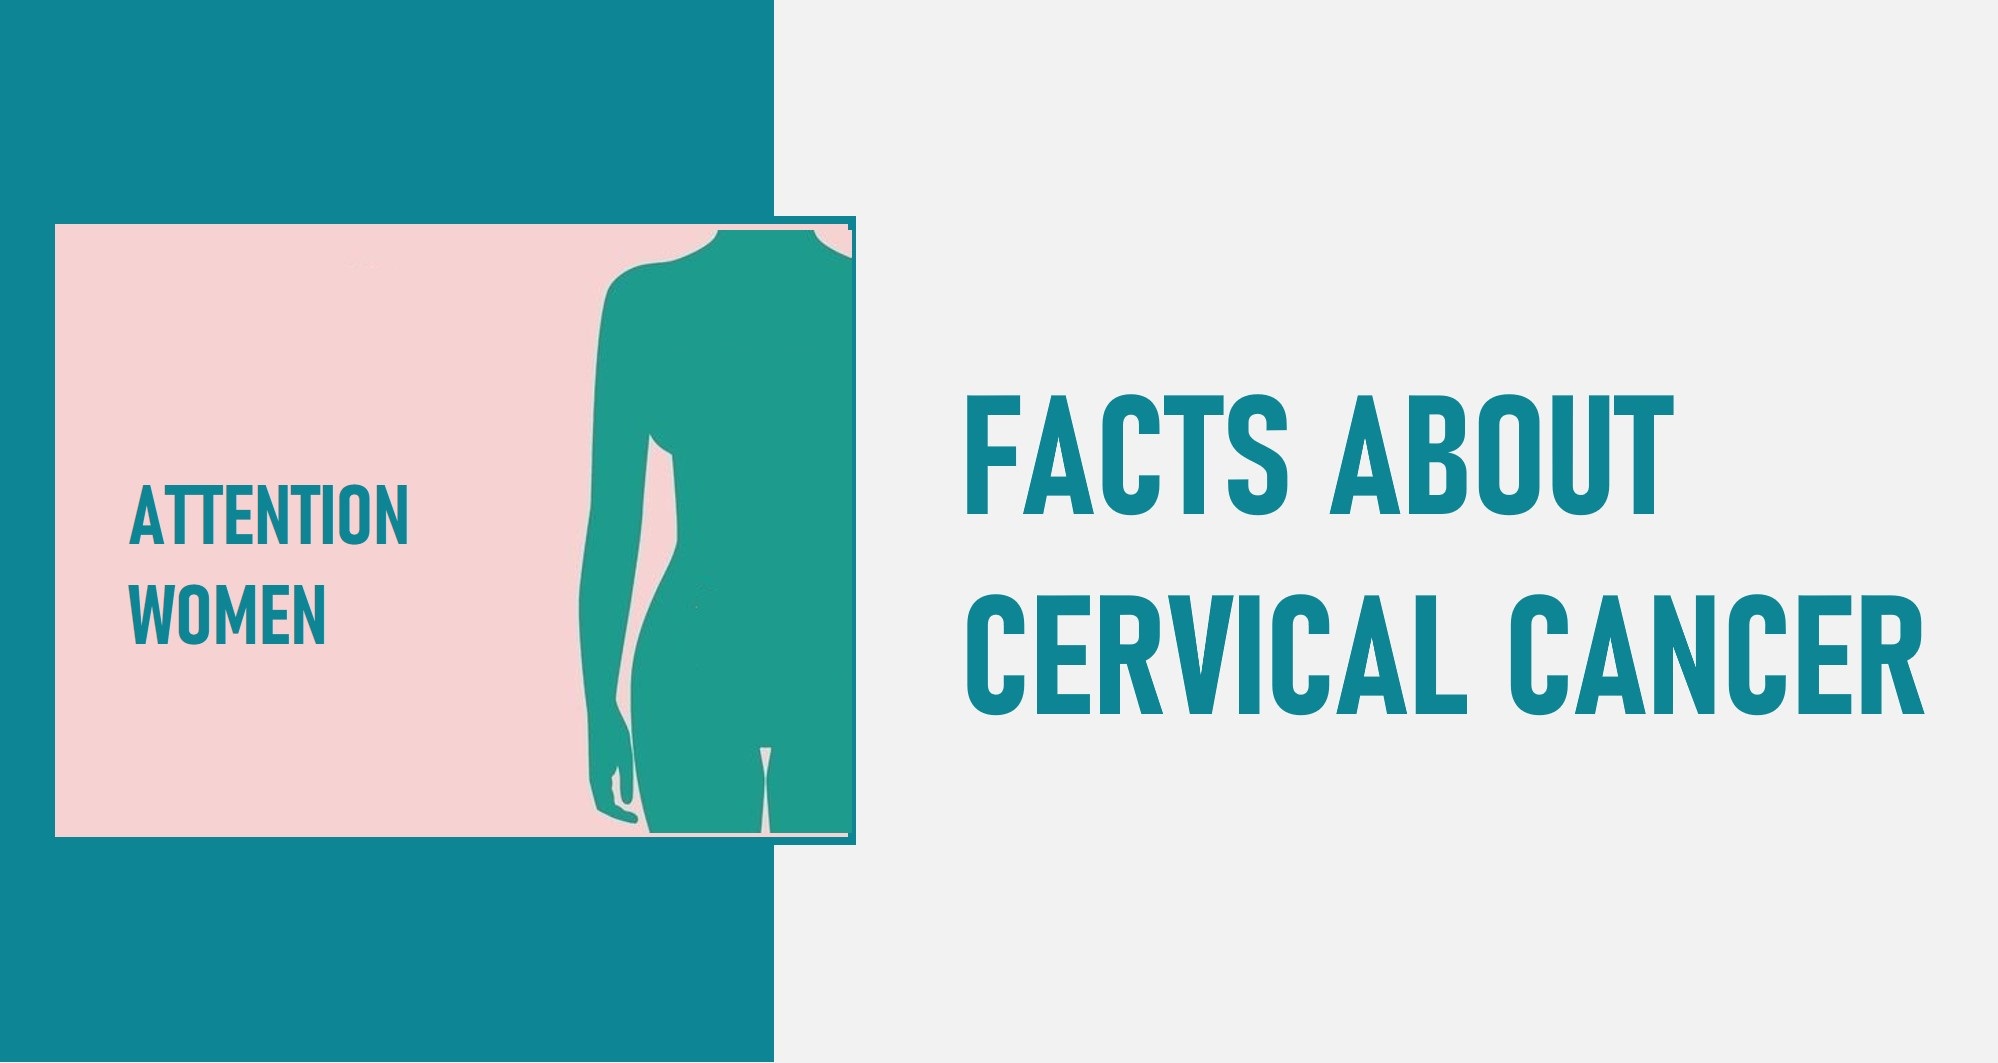 Attention Women: 5 Facts You Should Know About Cervical Cancer